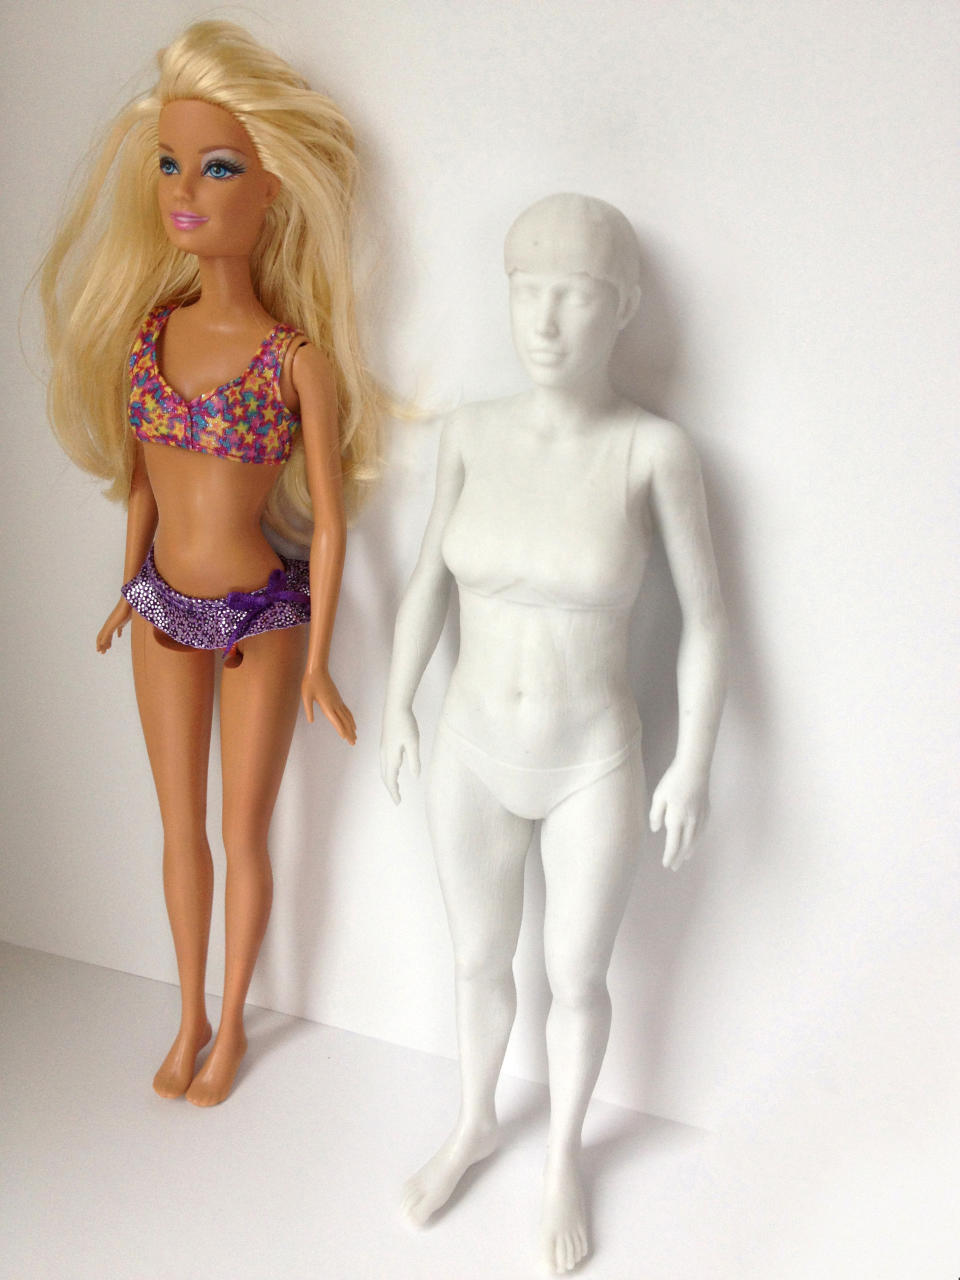 <div class="caption-credit">Photo by: Nickolay Lamm</div>The artist first created a 3D model of the new Barbie, basing the proportions on CDC measurements — such as a 33.62-inch waist and 15-inch neck circumference — of an average American 19-year-old woman. <br>